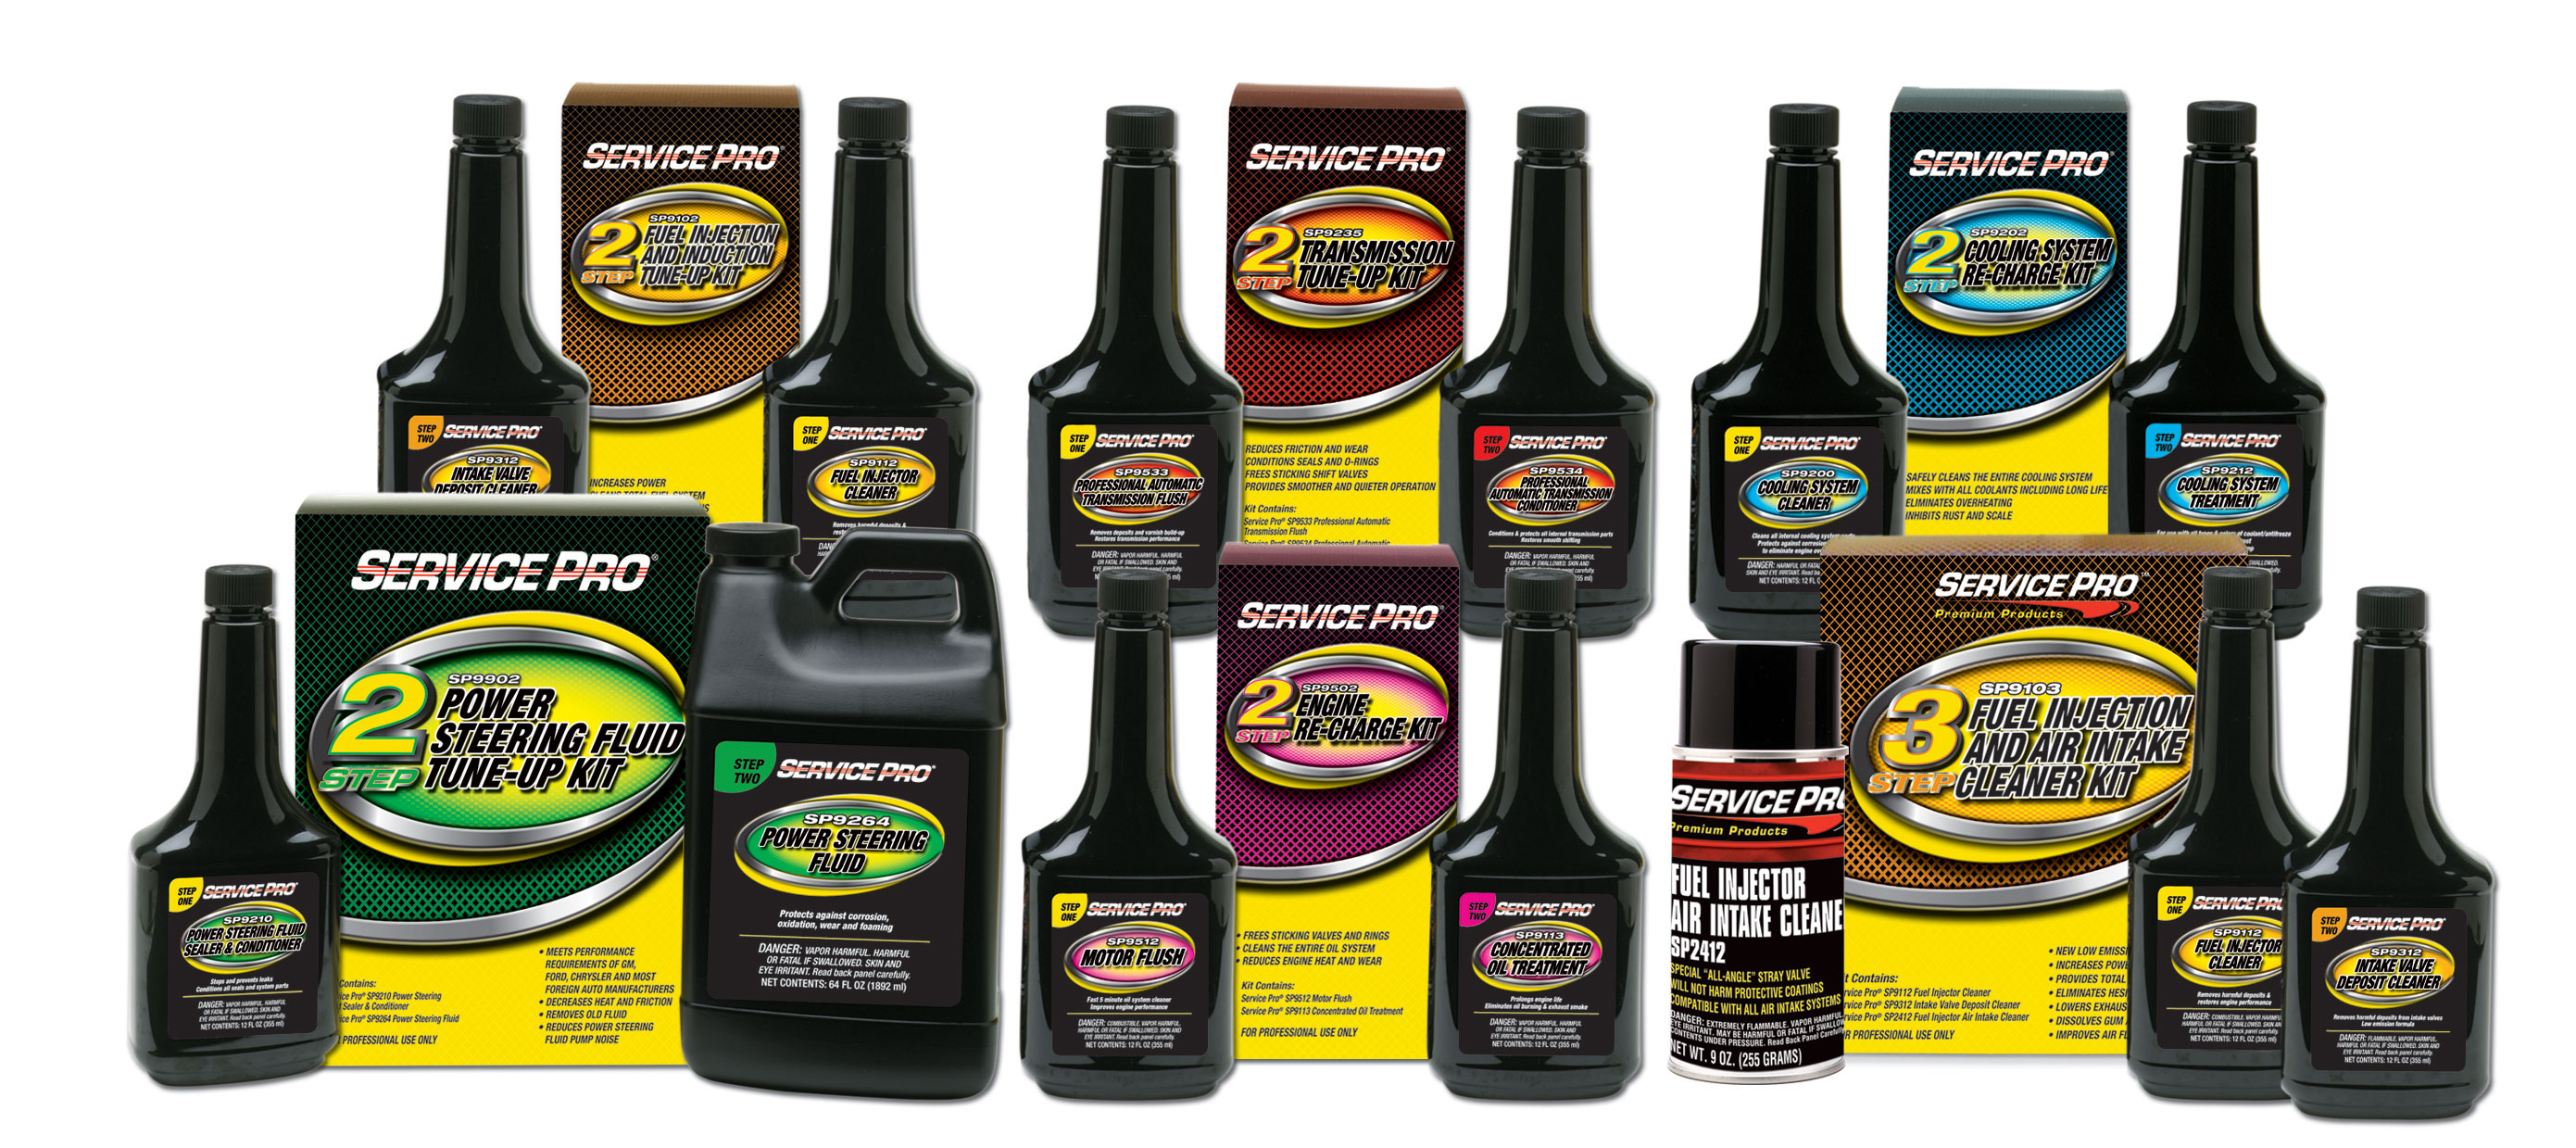 PROFESSIONAL CAR CARE SYSTEMS